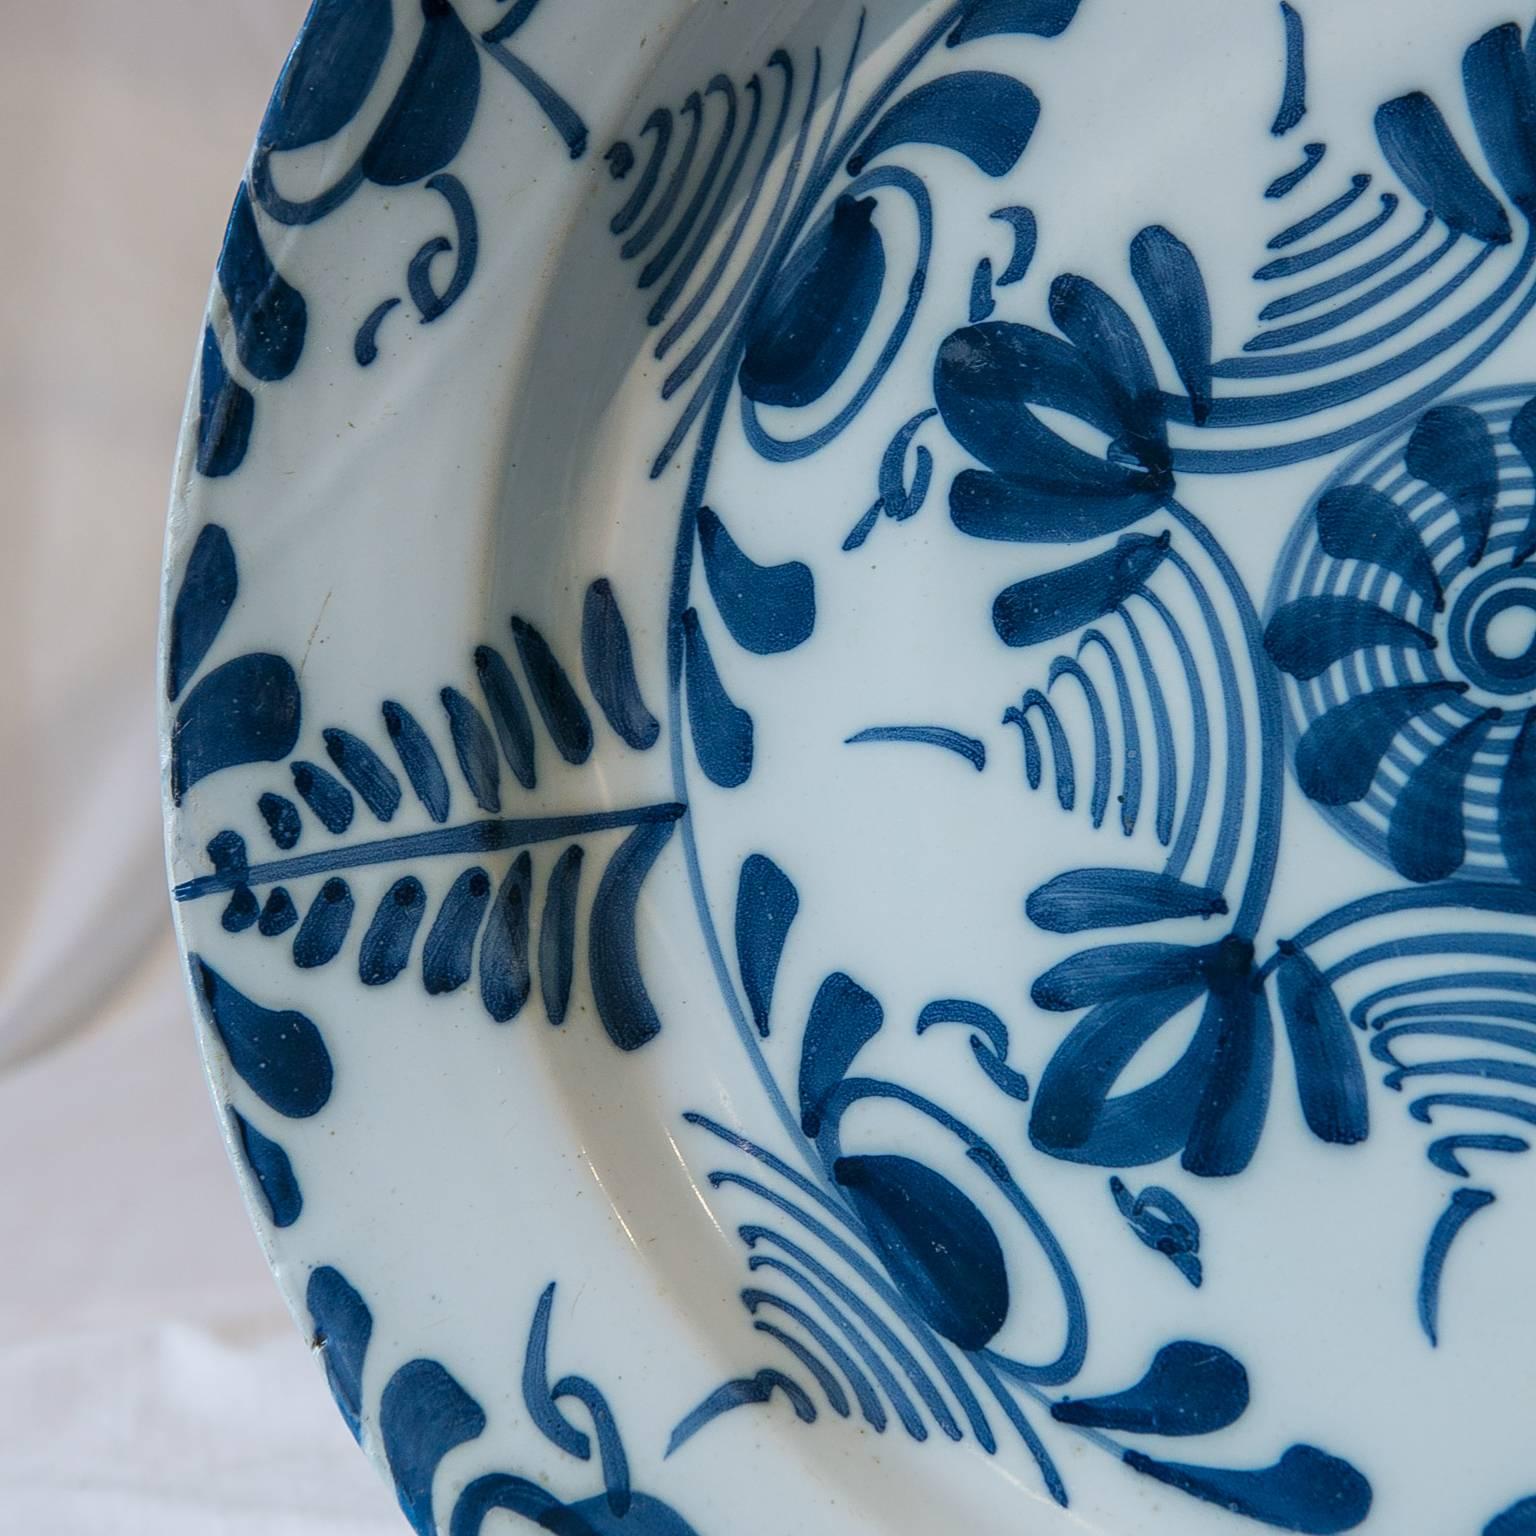 We are pleased to offer this exceptional 18th century Delft charger painted in a crisp, bold, geometric pattern. Made in England circa 1760 this energetic Blue and White design indicates that the charger was likely made in the Lambeth High Street